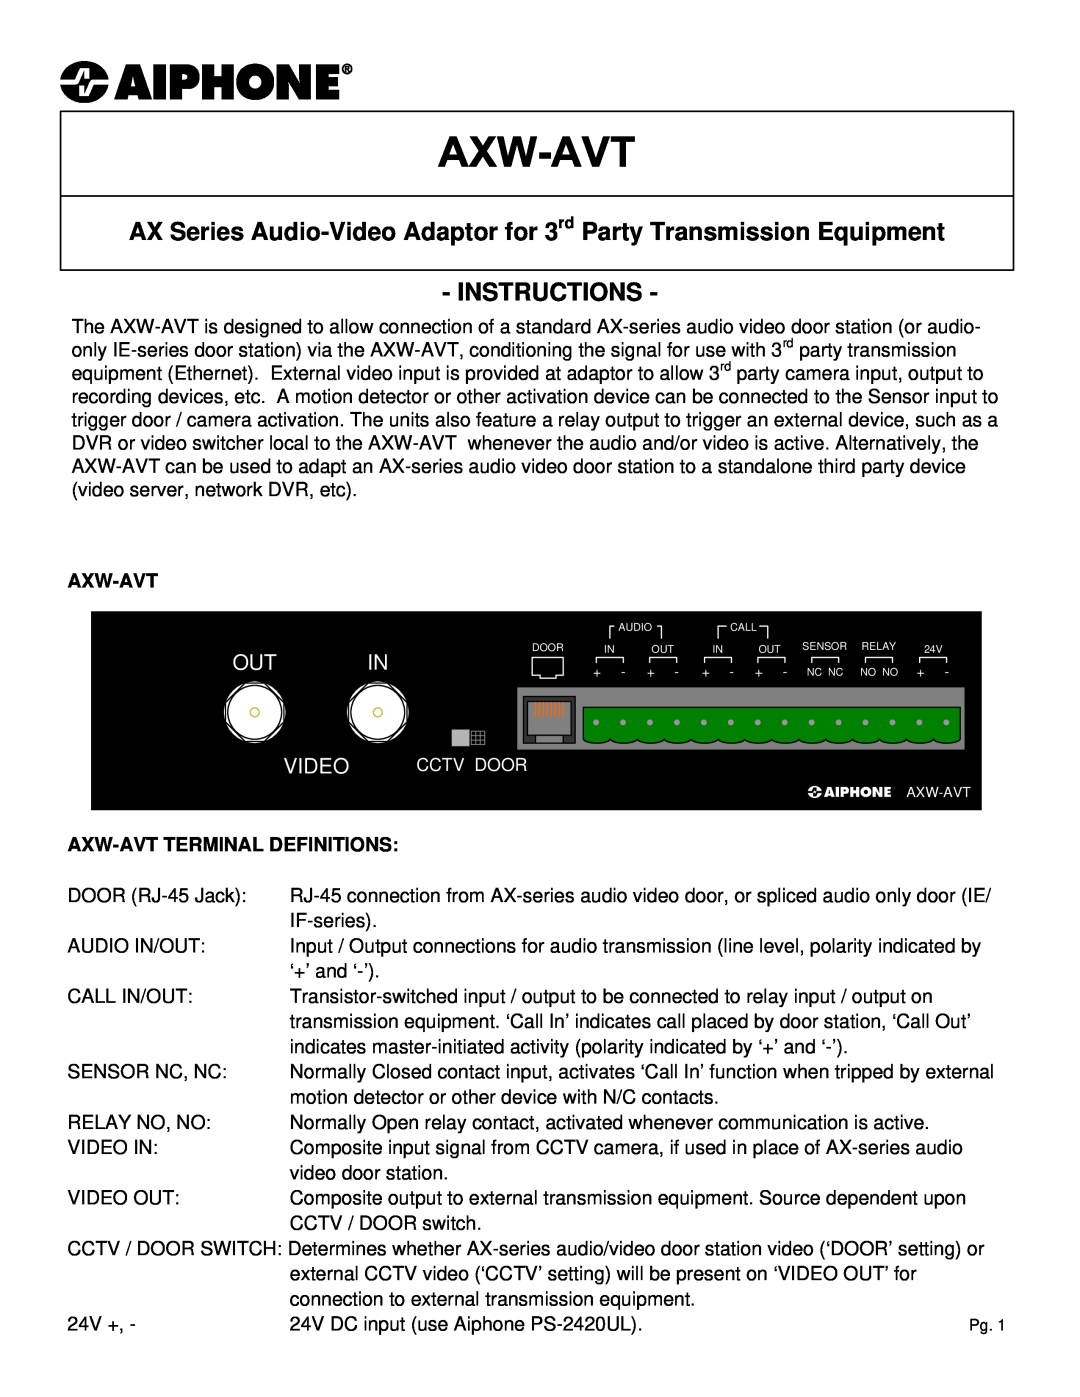 Aiphone AXW-AVR, AXW-AVT manual Out In, Video, Instructions, Axw-Avtterminal Definitions 